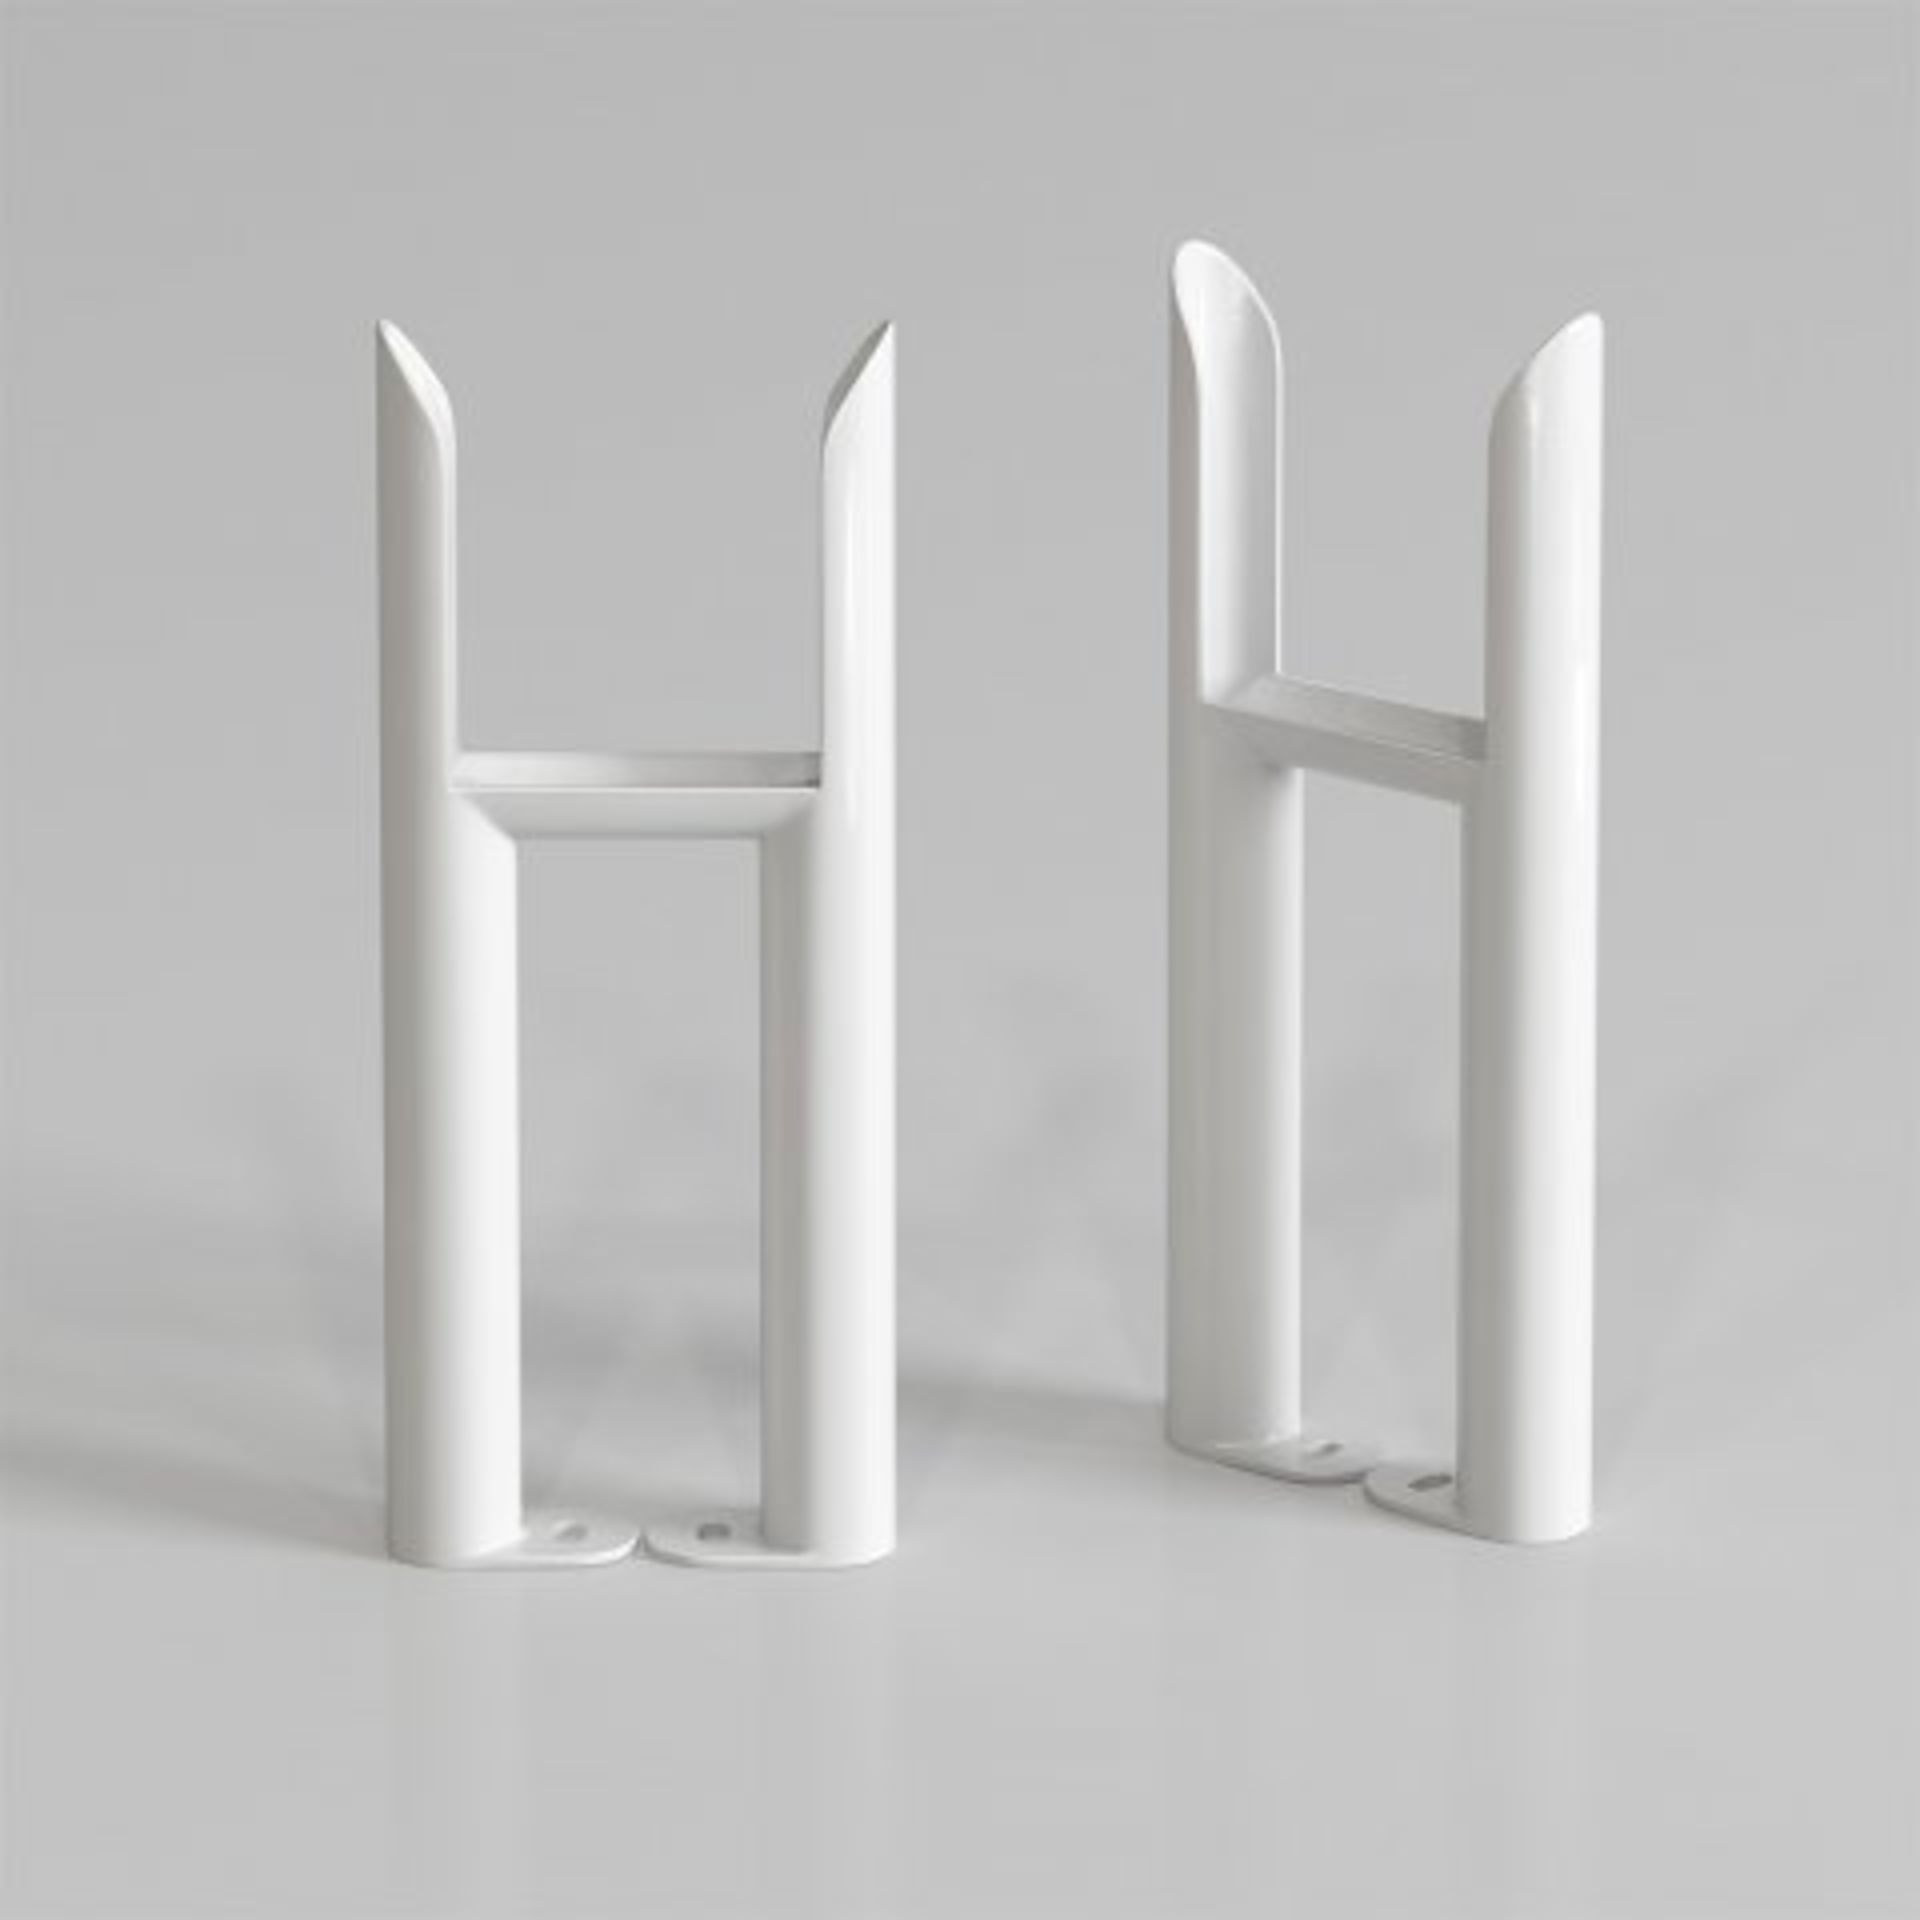 (M60) 300x72 - Wall Mounting Feet For 3 Bar Radiators - White Our supporting legs for radiators will